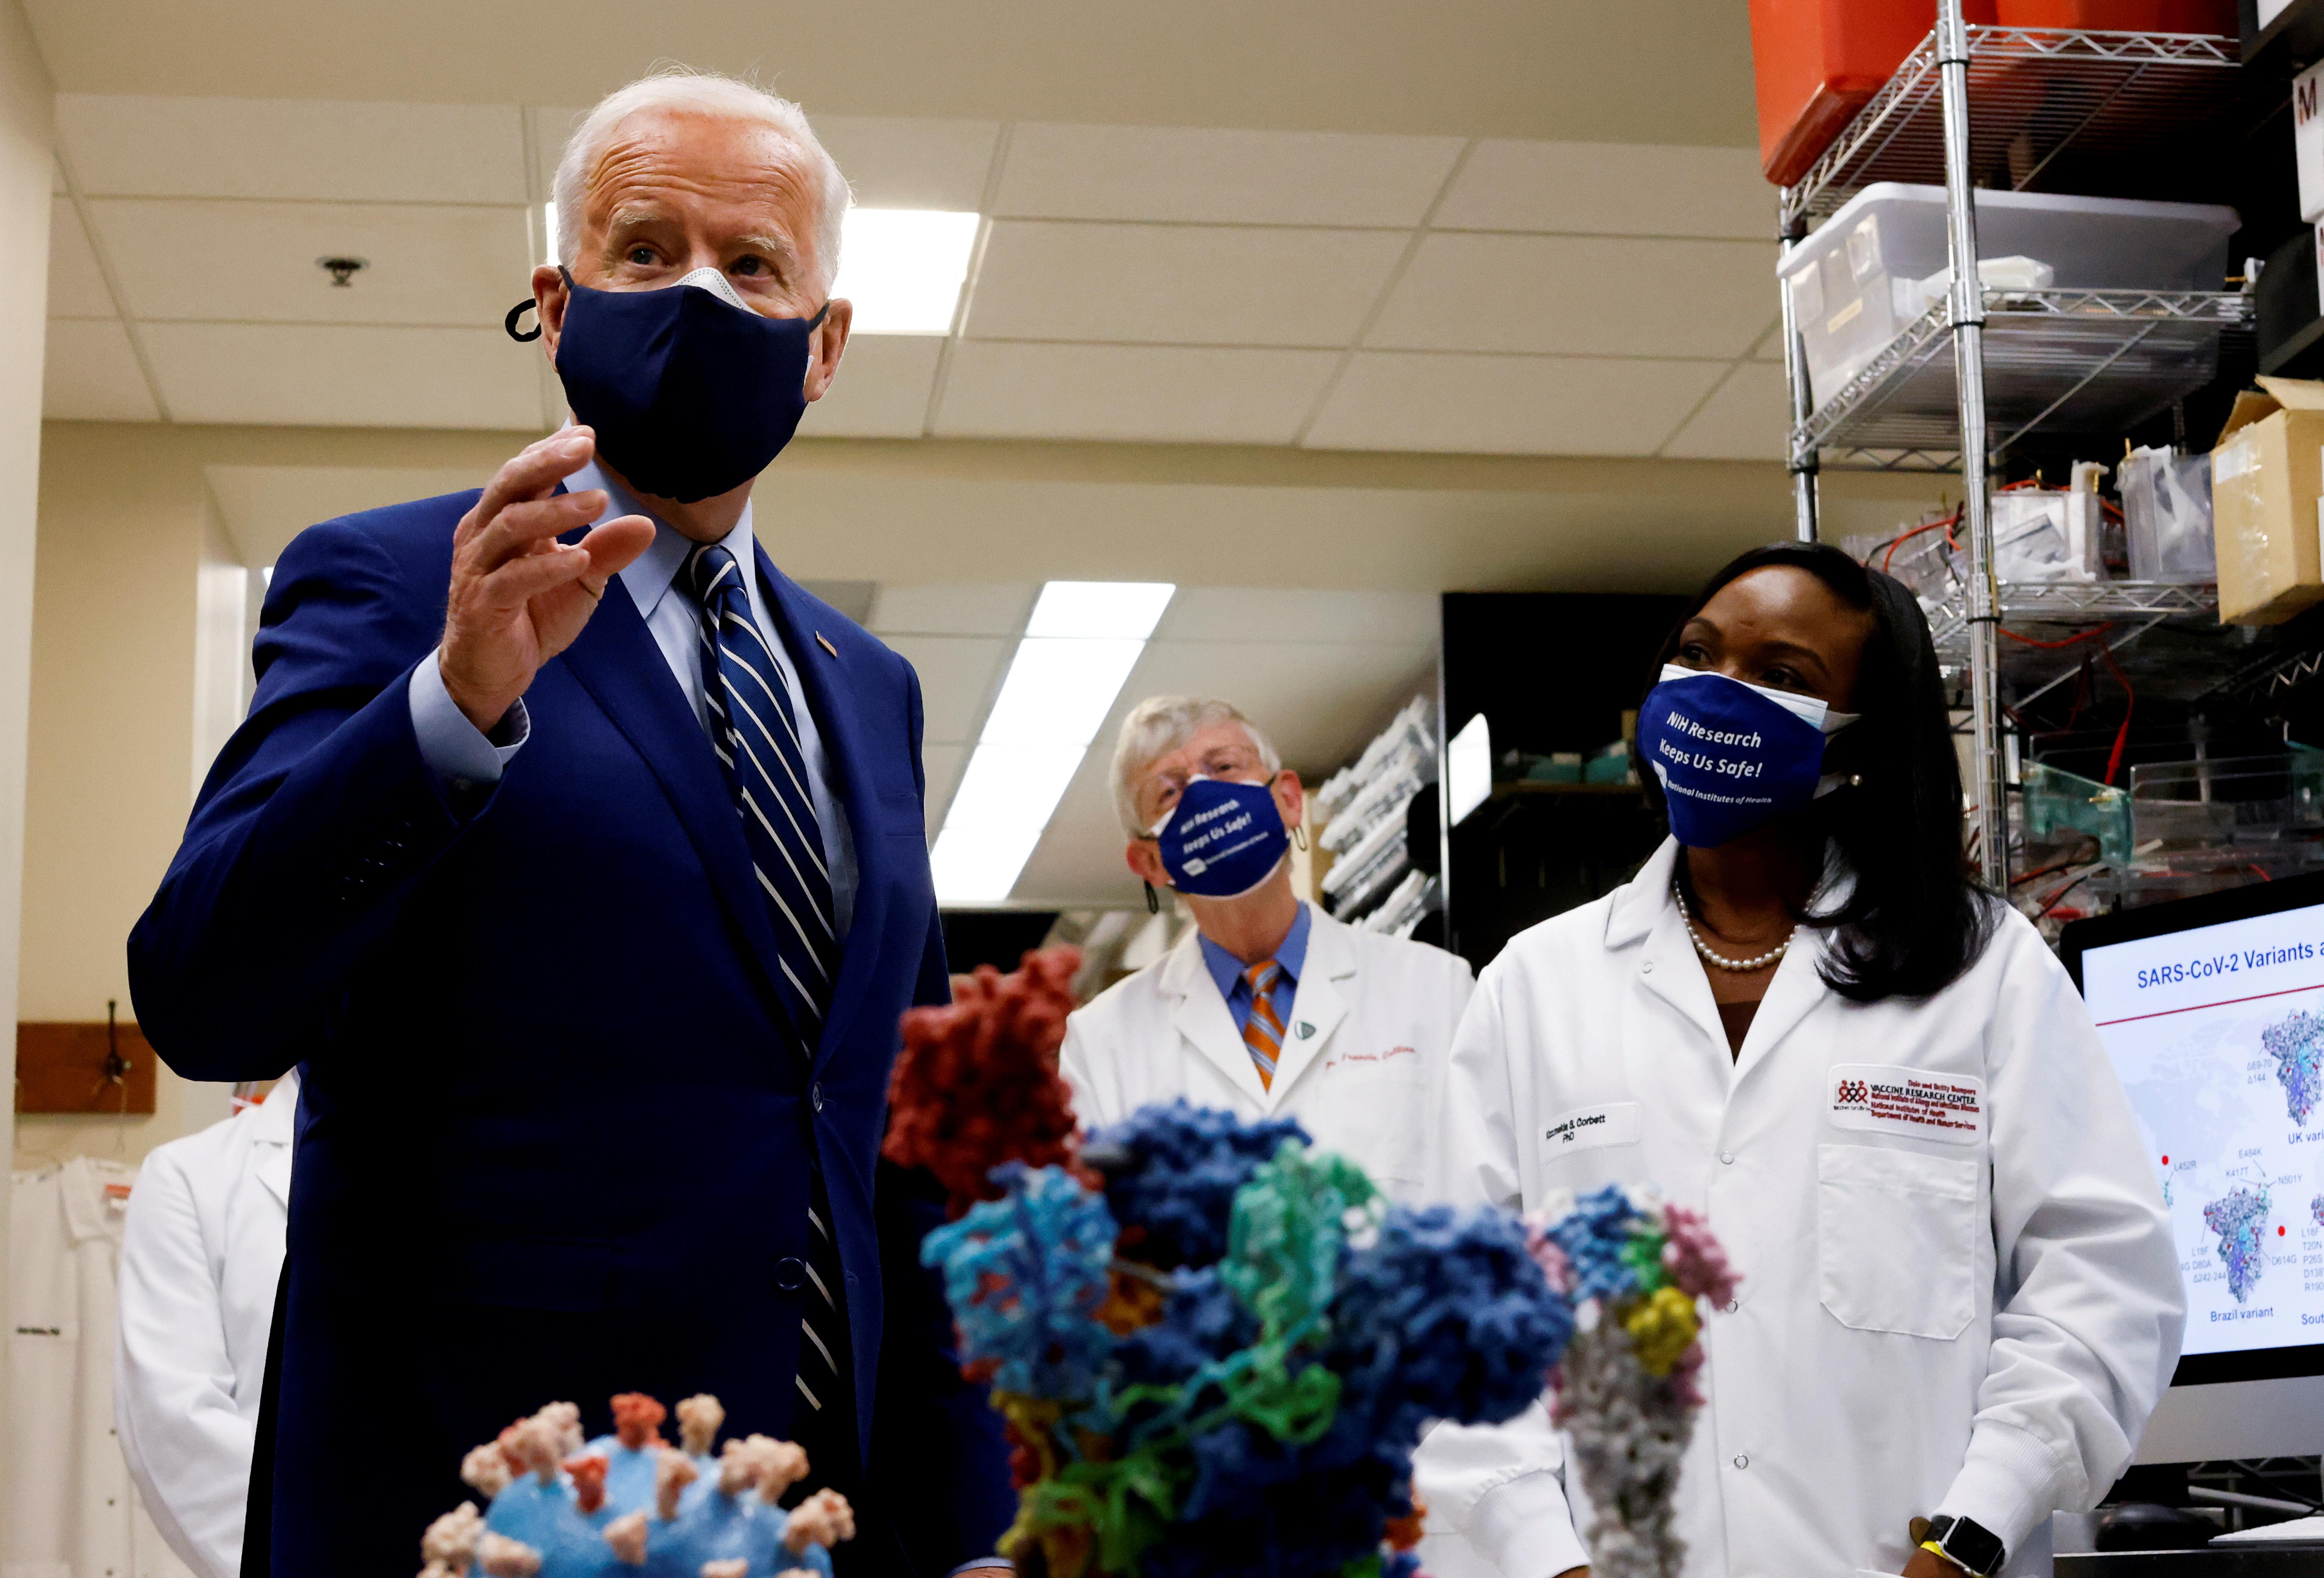 U.S. President Joe Biden speaks next to an NIH staff member as NIH Director Francis Collins listens during a visit to the Viral Pathogenesis Laboratory at the National Institutes of Health (NIH) in Bethesda, Maryland, U.S., February 11, 2021.